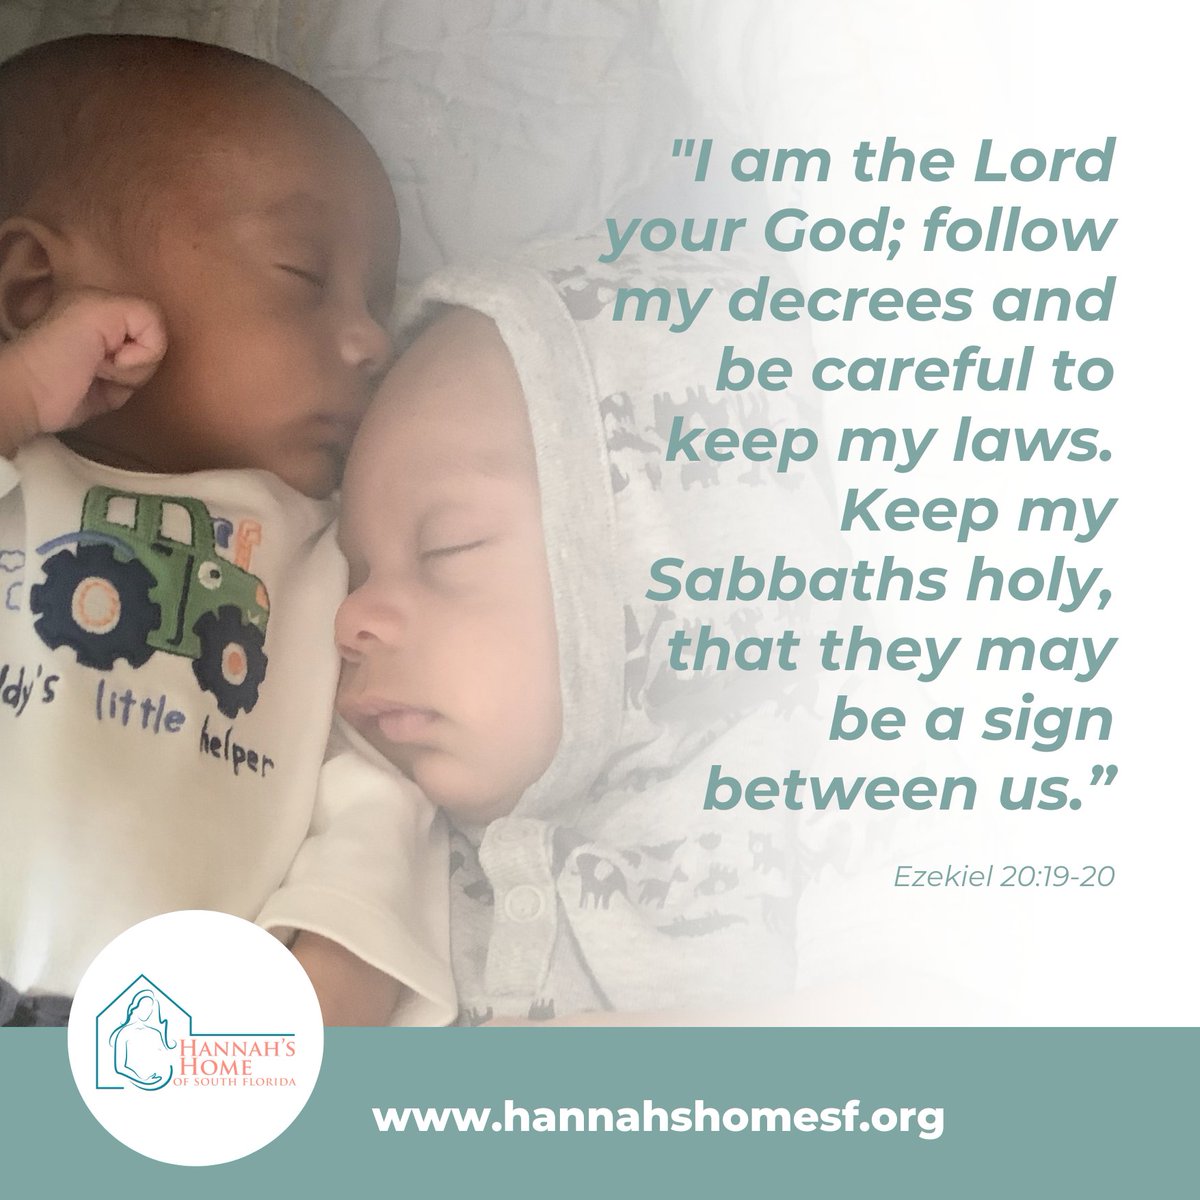 'Keep my Sabbaths holy, that they may be a sign between us.' We hope you have a blissful weekend full of fun and well-deserved rest!

#happyweekend #faithfriday #nonprofitorganization #tequestafl #palmbeachcounty #babies #maternityhome #shelter #supportmoms #jupiterfl #tequestafl